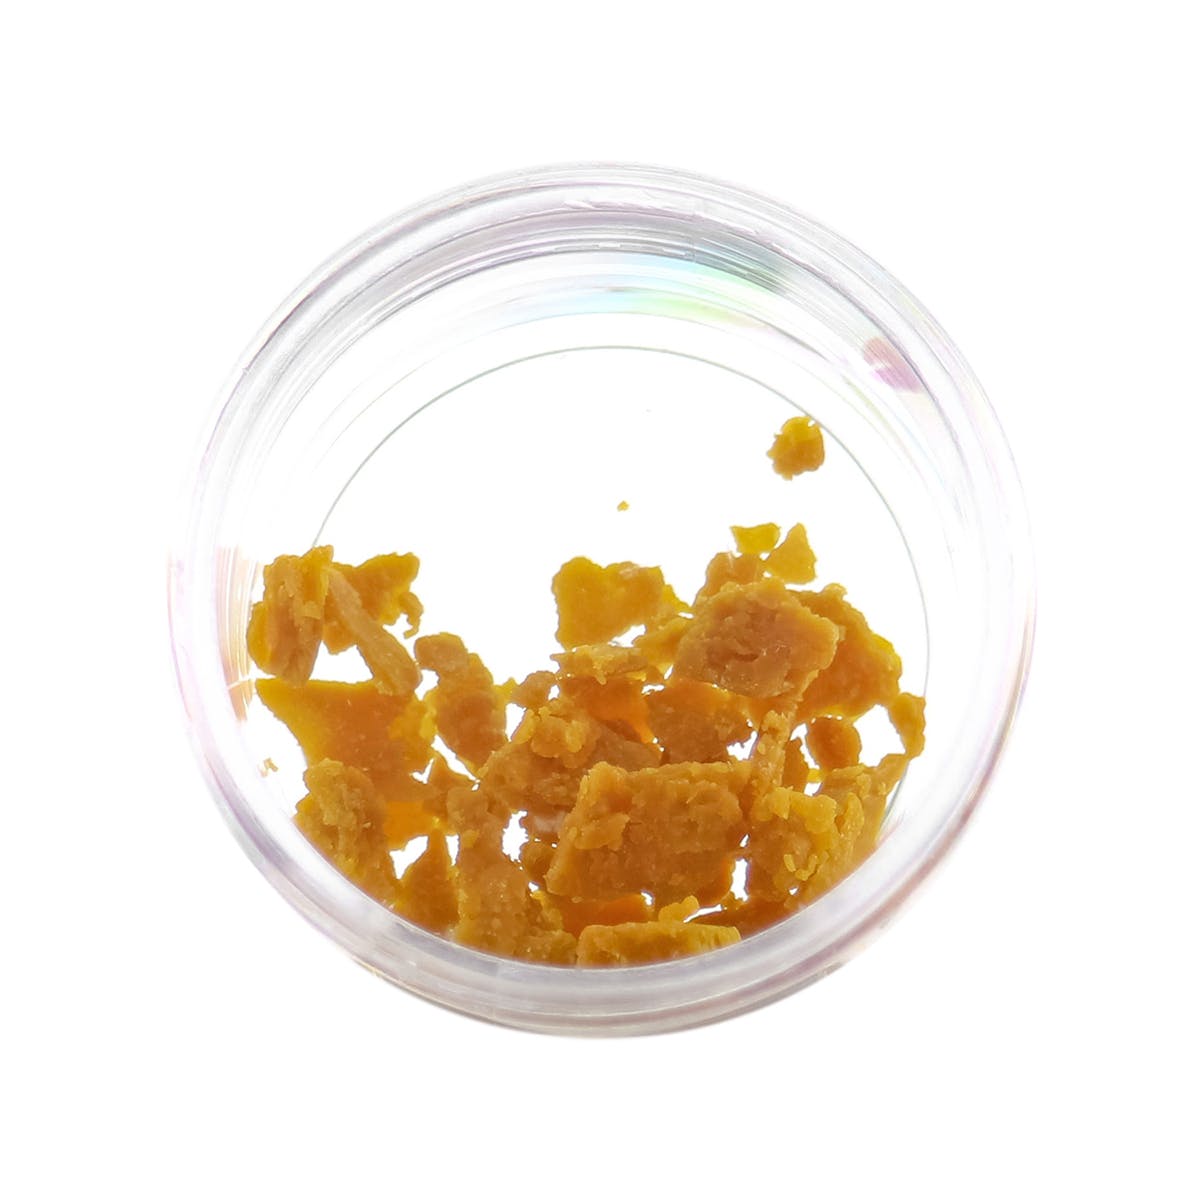 concentrate-apollo-grown-headband-og-crumble